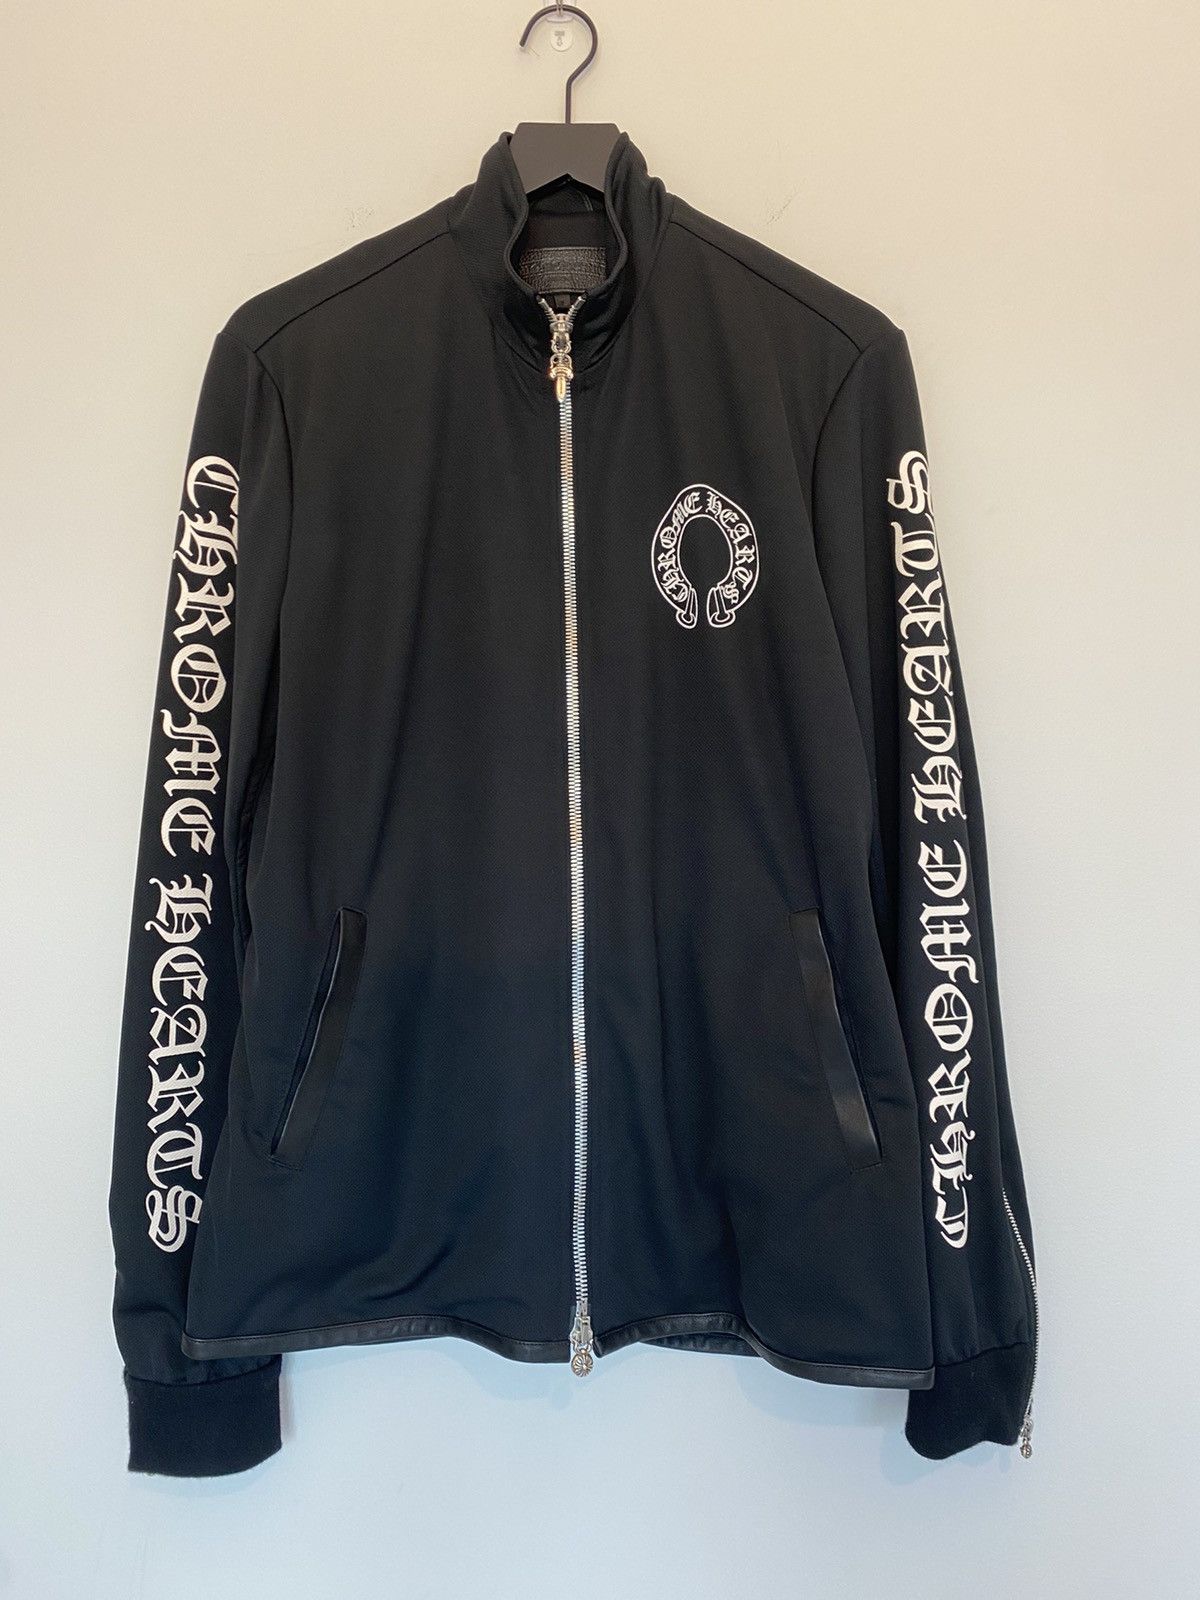 Chrome Hearts Chrome Hearts Track Jacket Leather Zipup Front | Grailed